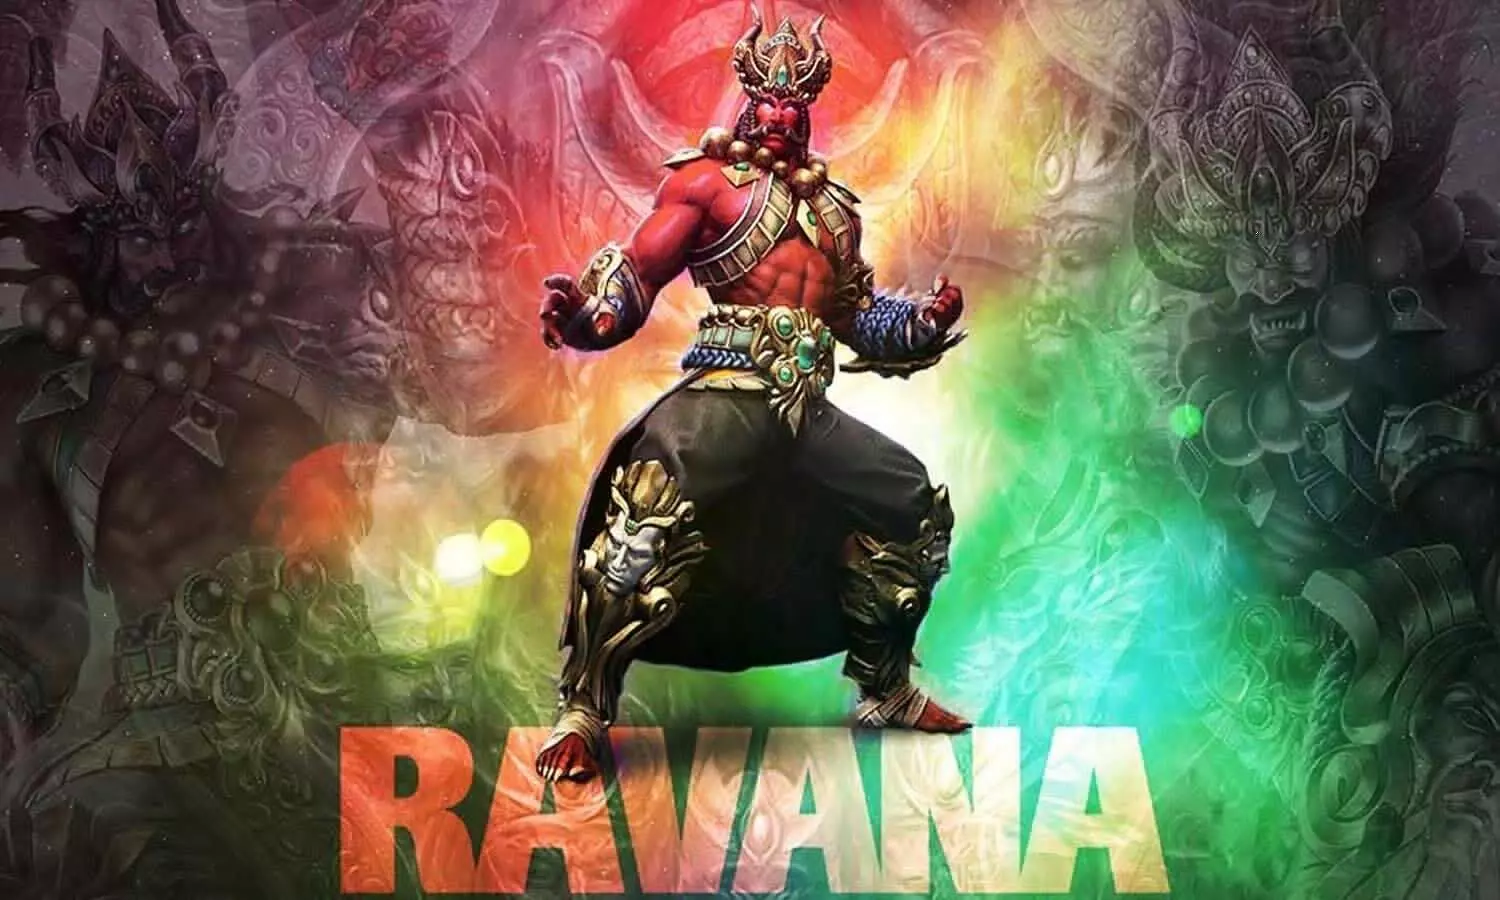 Know the full story about Ravana, you will be surprised